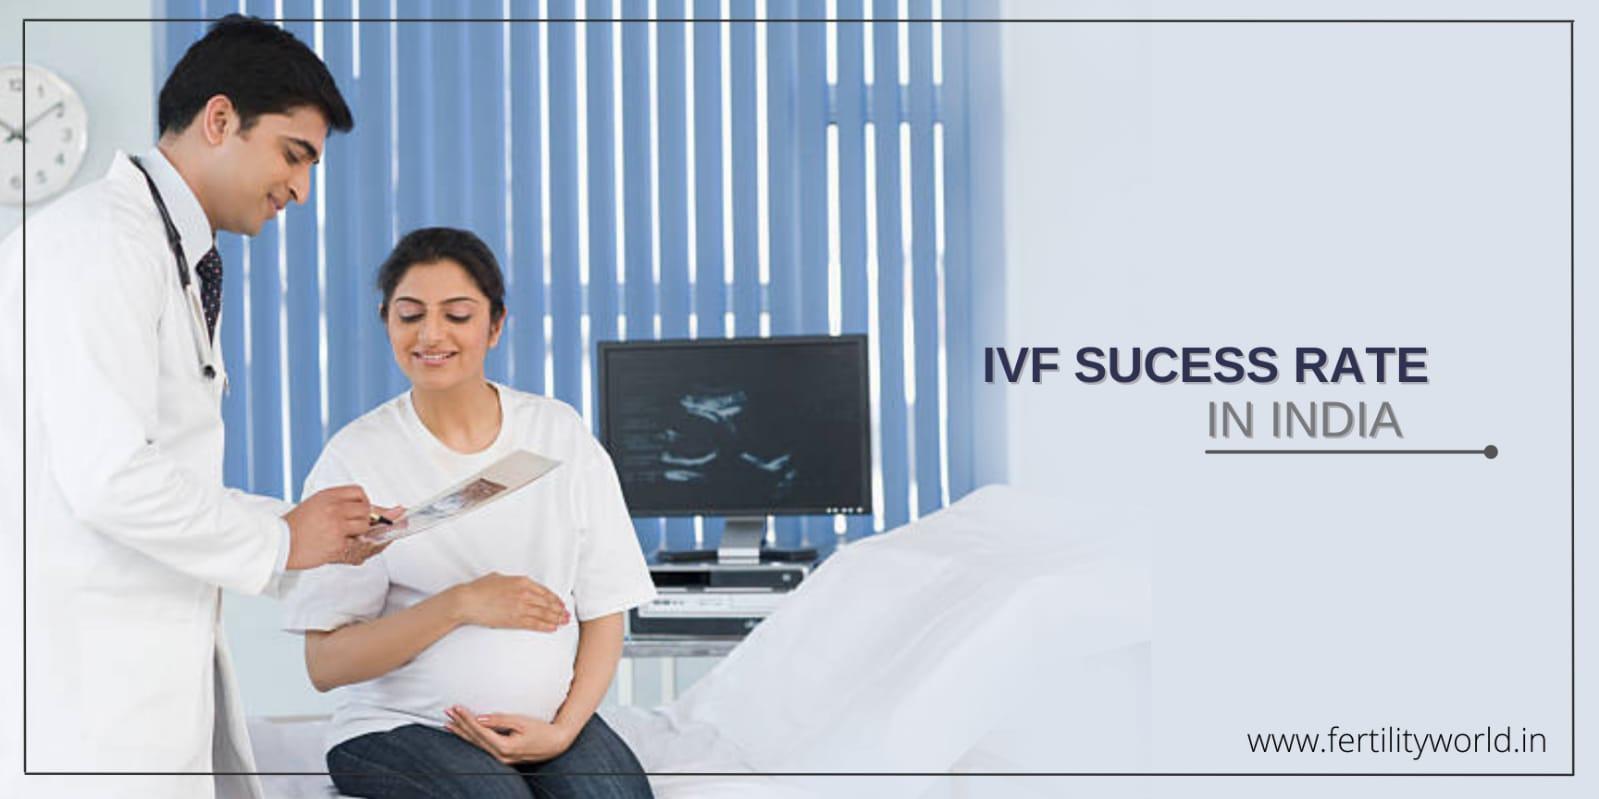 IVF Success Rate in India